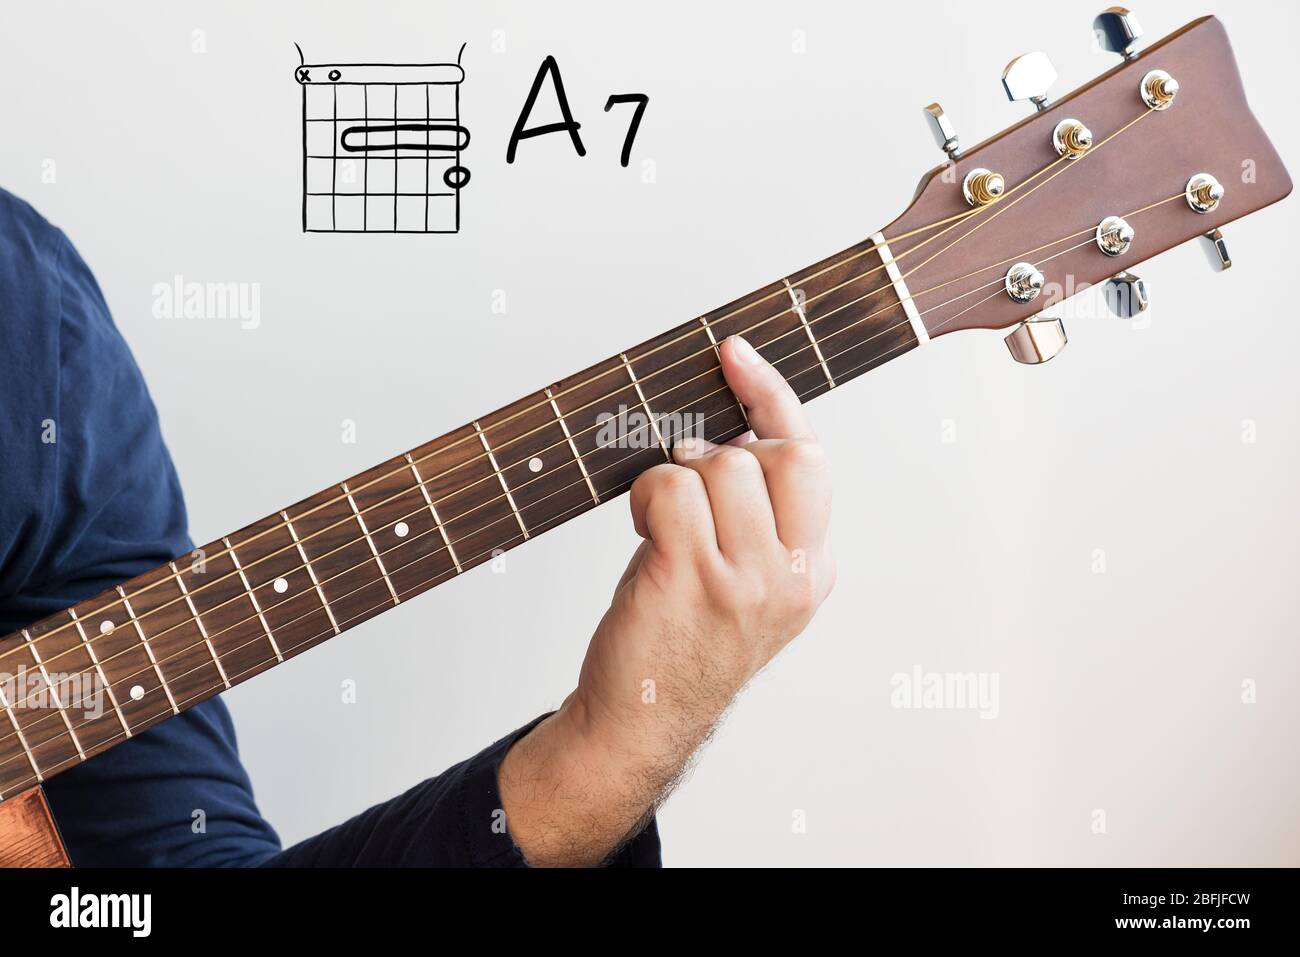 Learn Guitar - Man in a dark blue shirt playing guitar chords displayed on  whiteboard, Chord A7 Stock Photo - Alamy